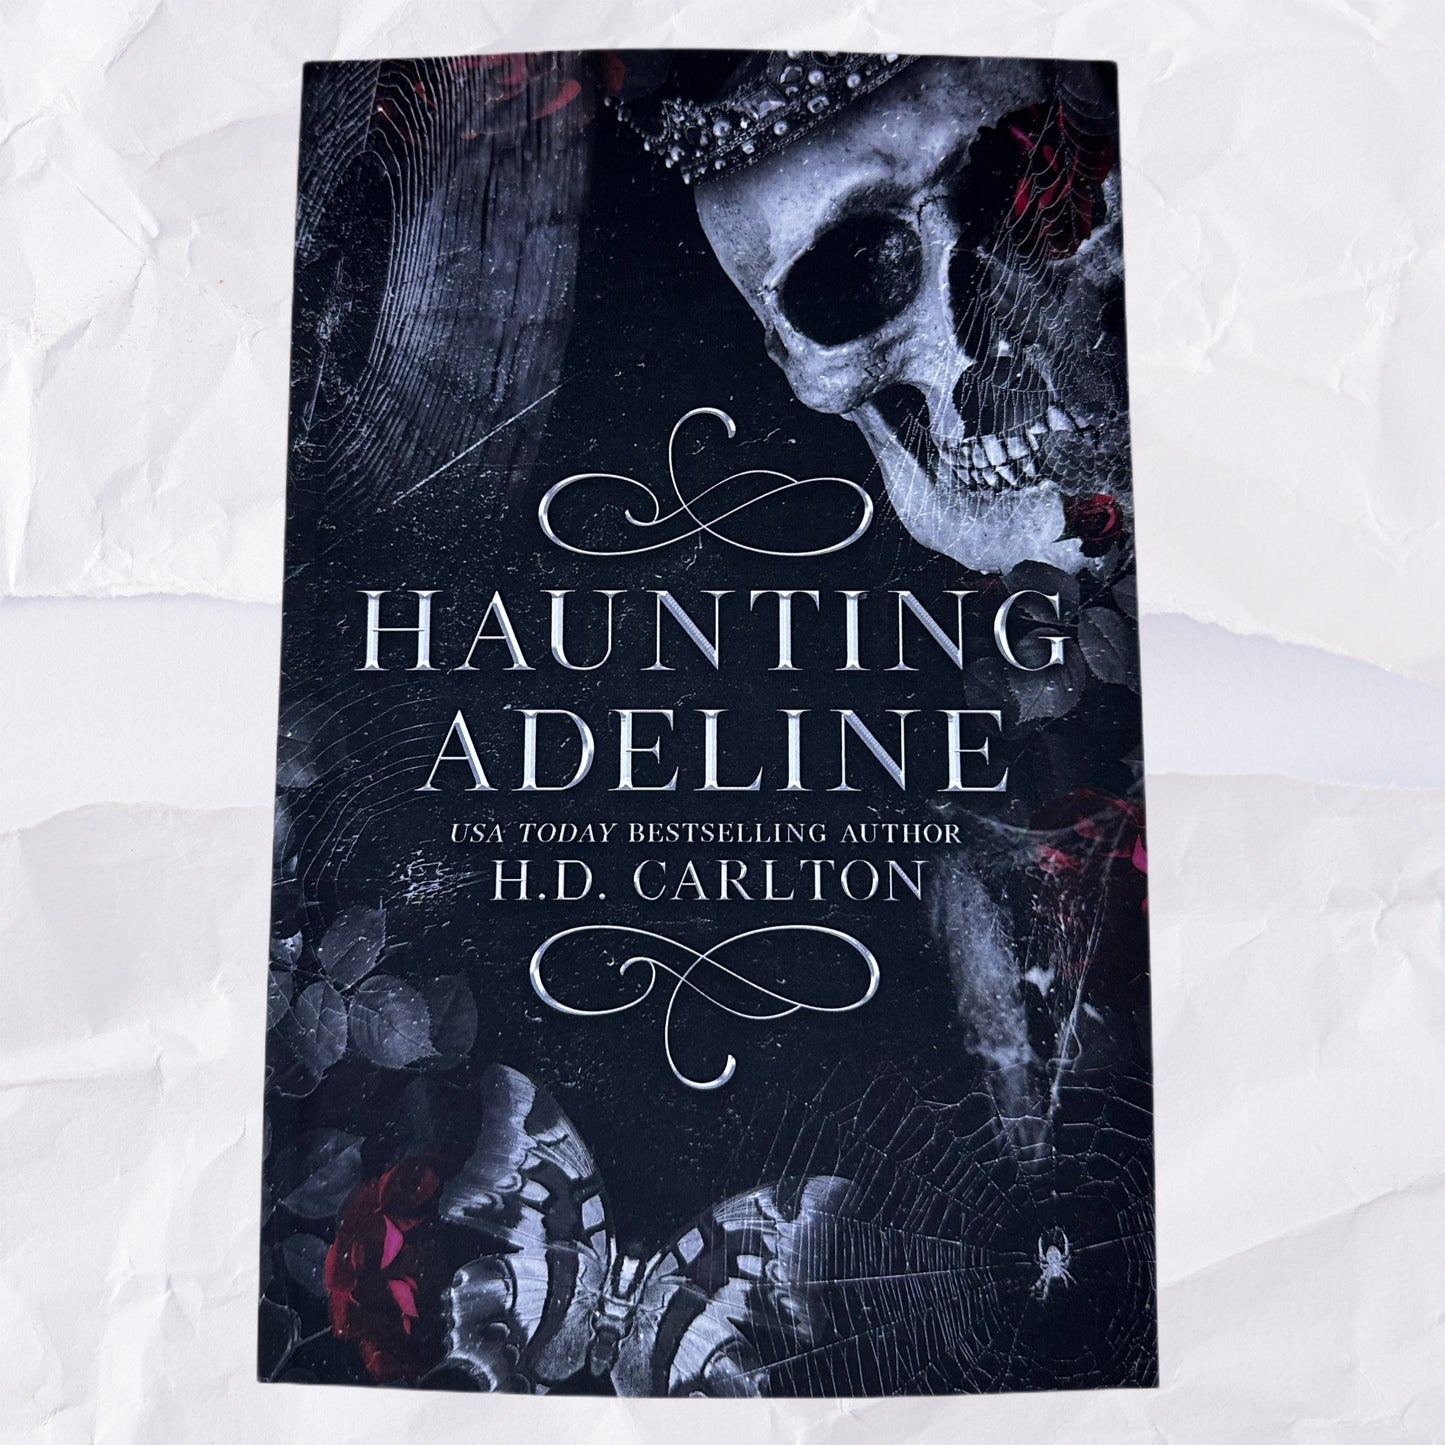 Haunting Adeline (Cat and Mouse #1) by H.D. Carlton